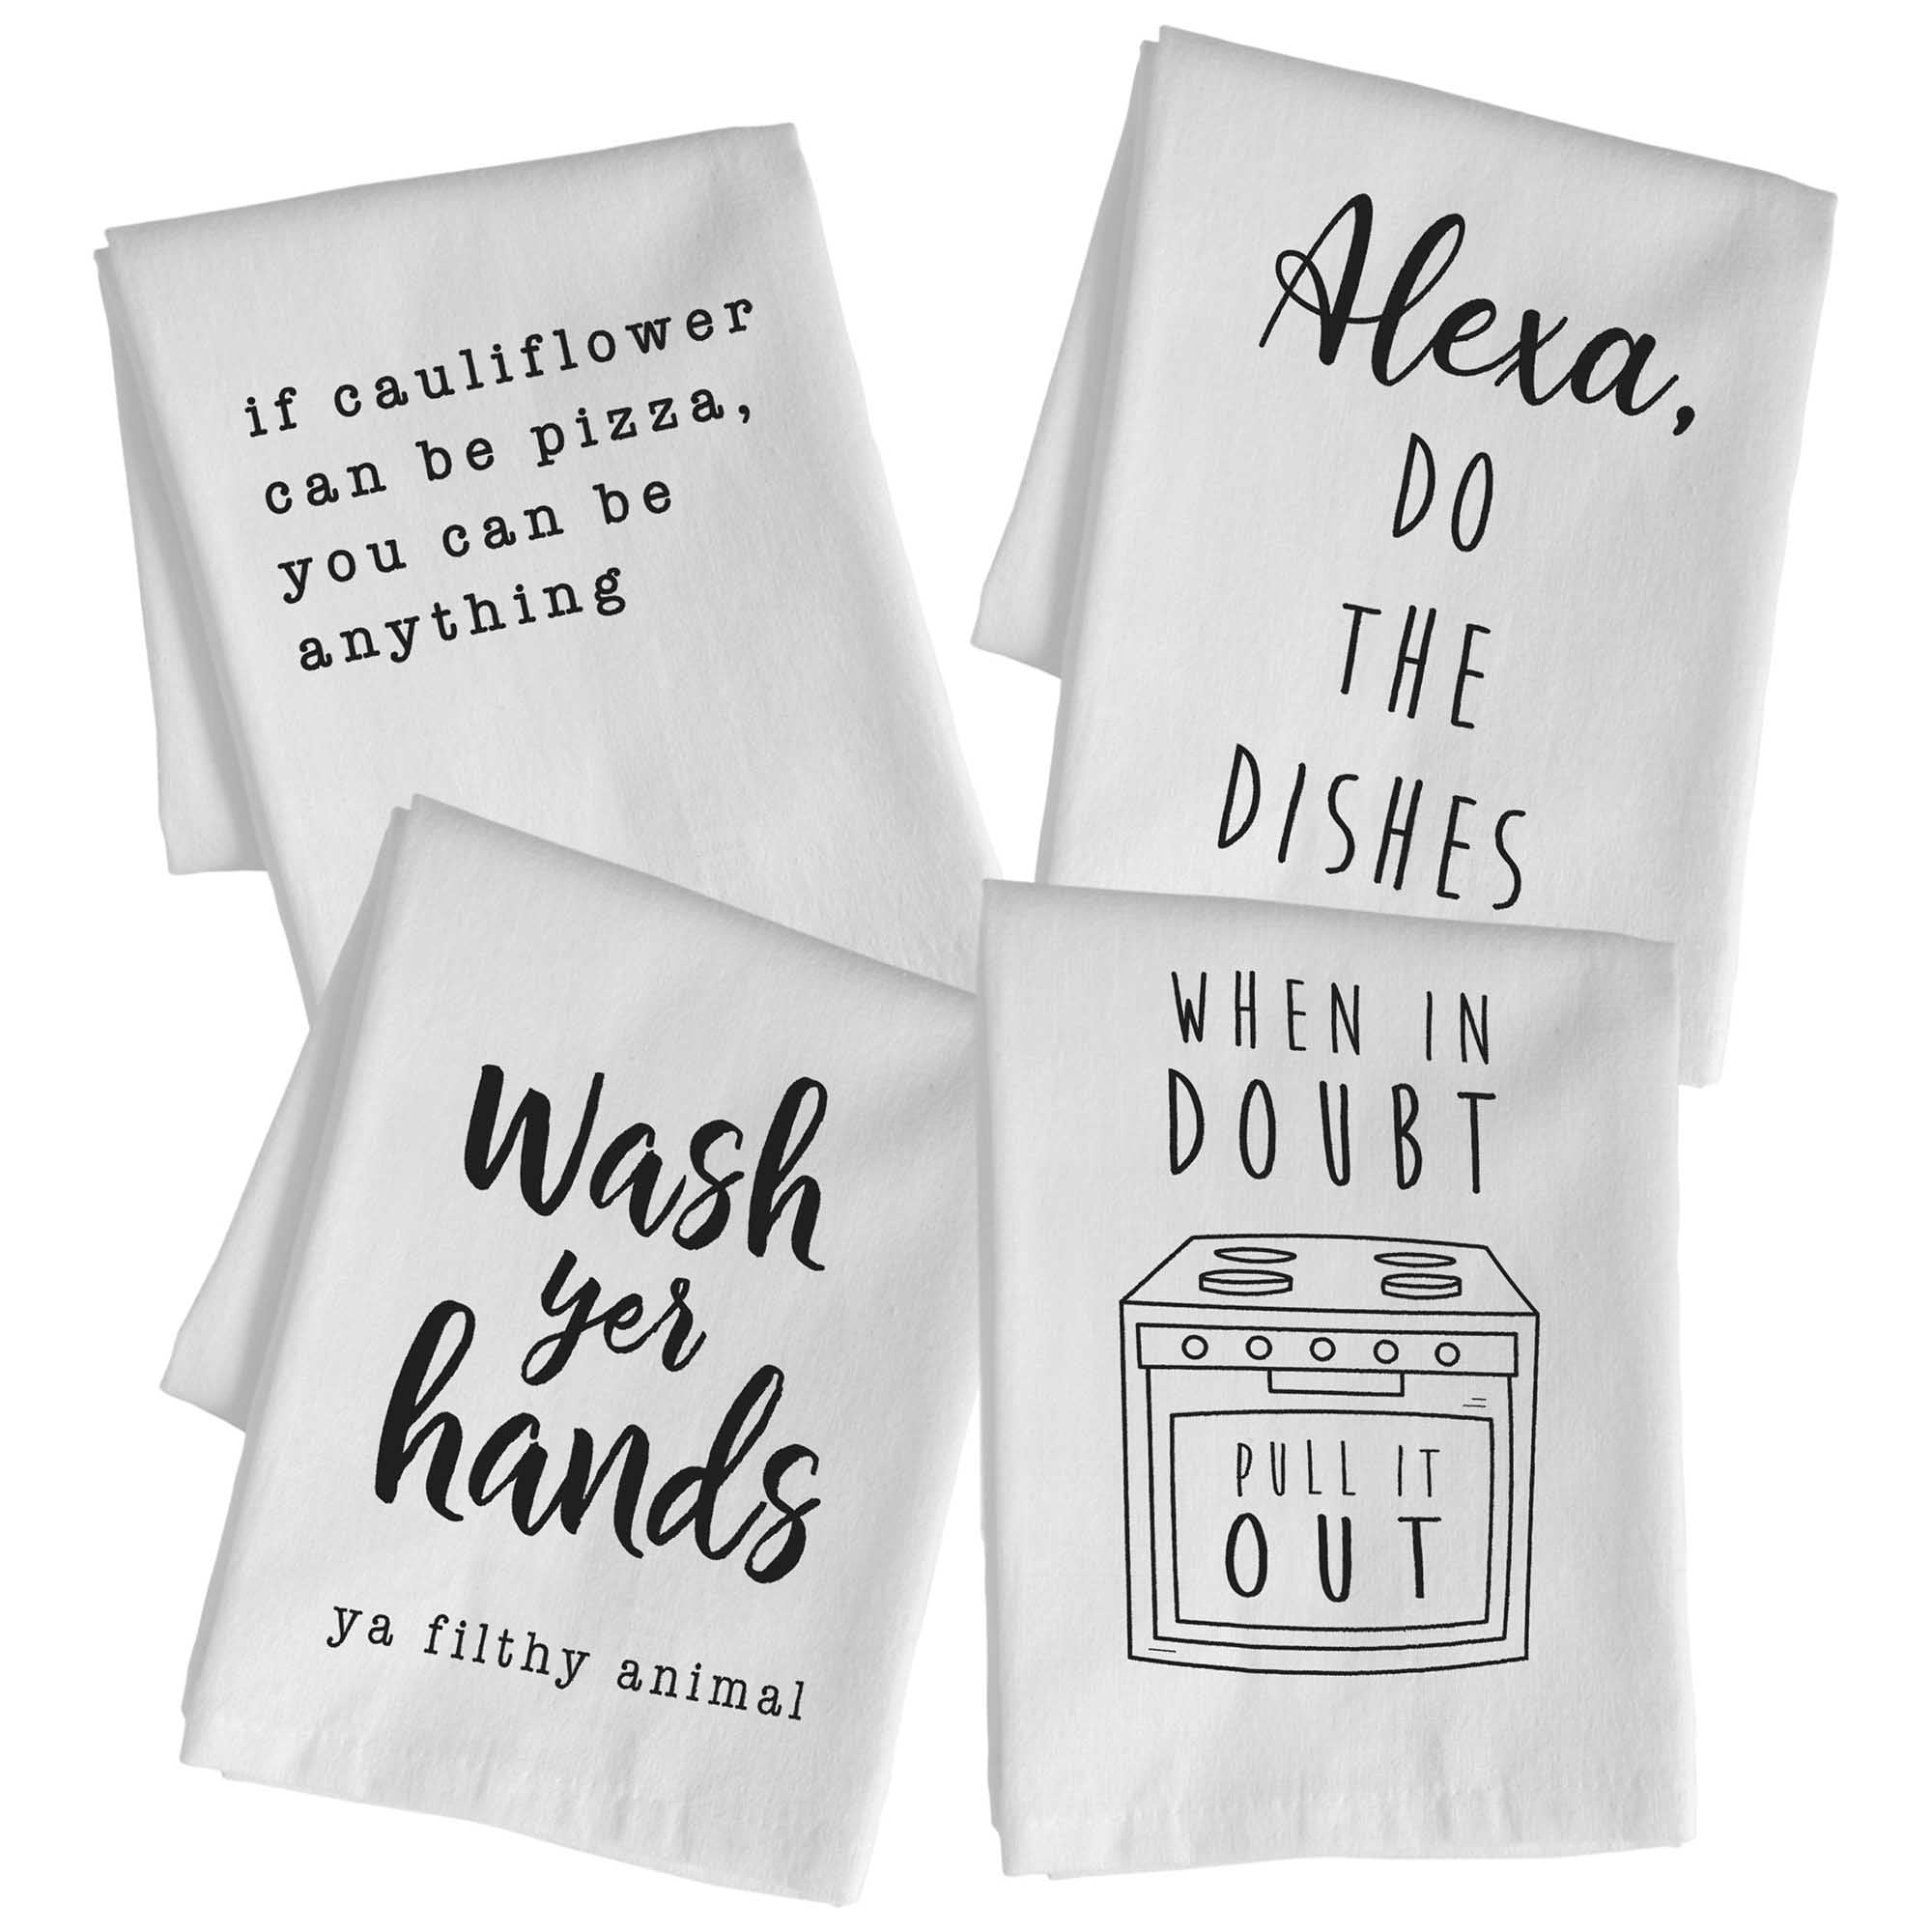 If you can't laugh at yourself, I will. Kitchen Towel, FREE SHIPPING